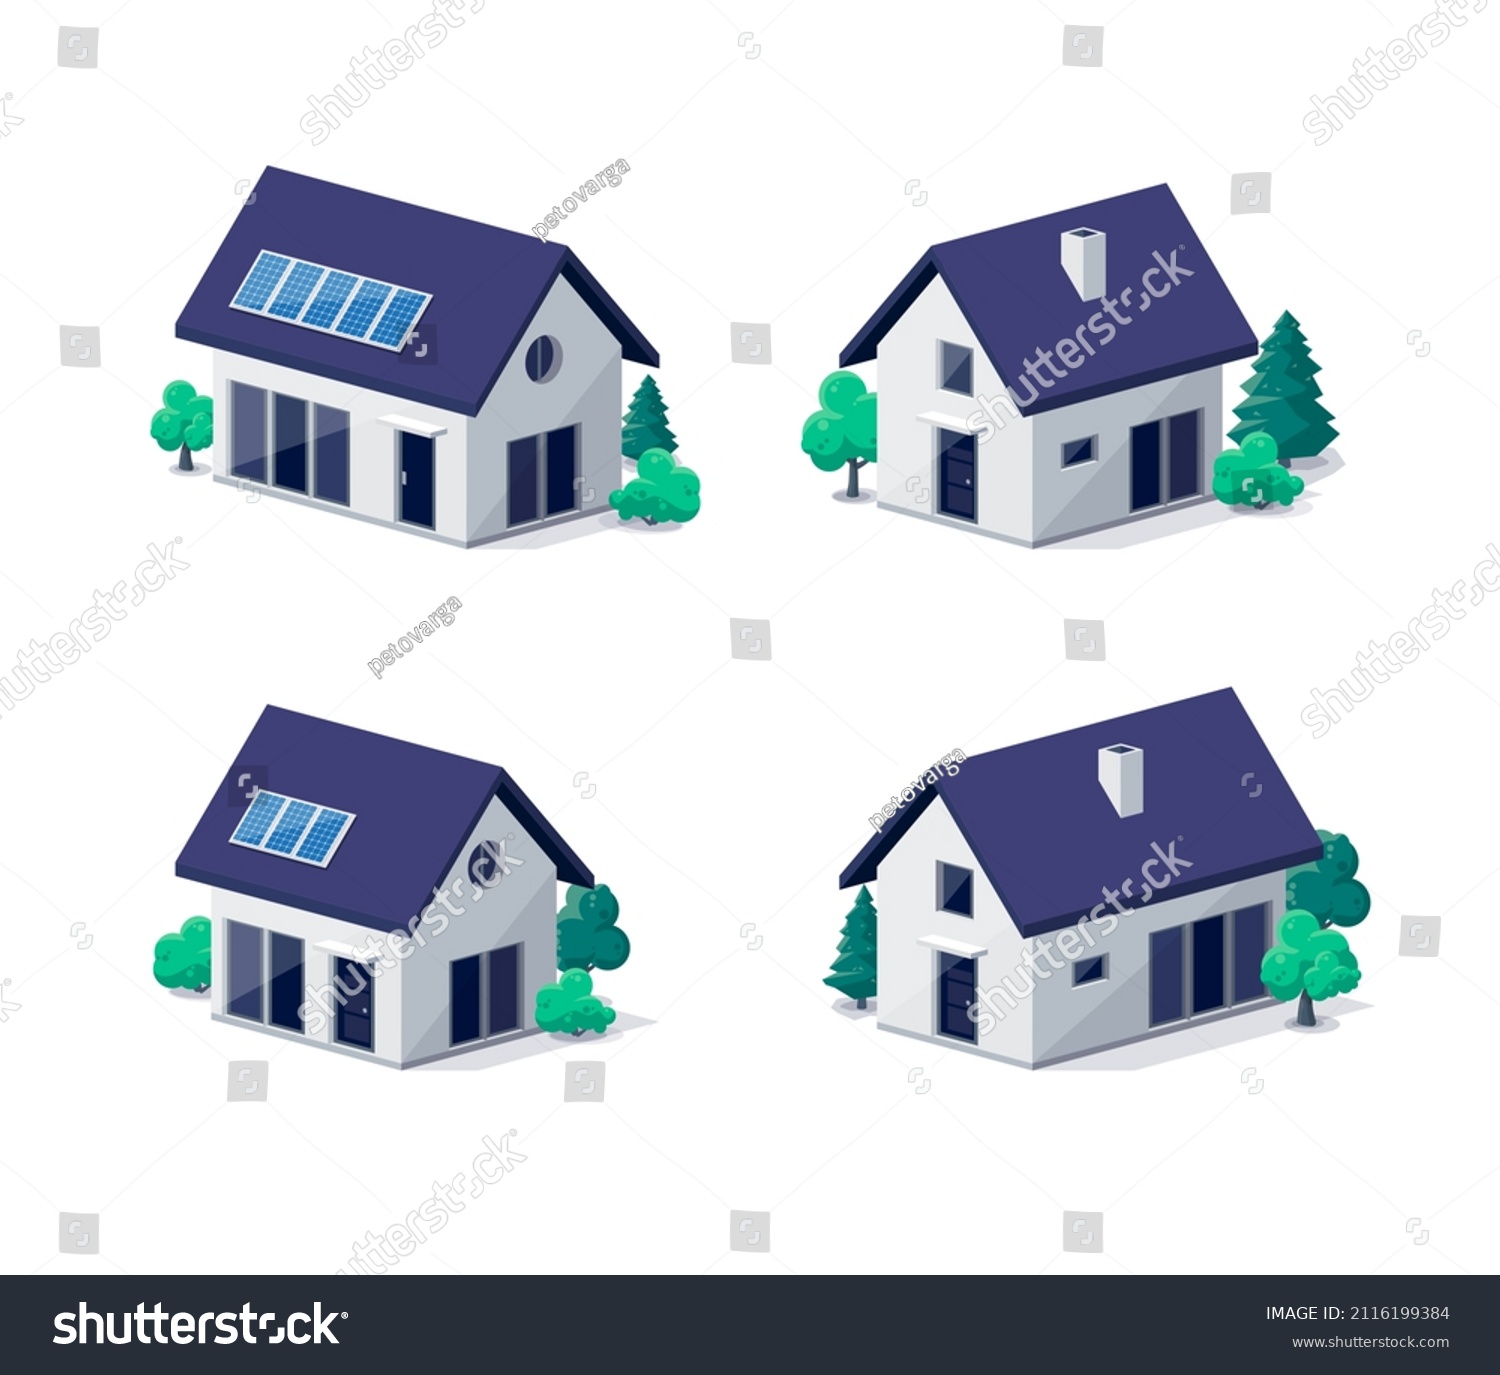 SVG of Classic modern family house building icon in 3d view. Residential home property. Contemporary standard suburban village style with gable roof and solar panels. Isolated vector real estate illustration svg